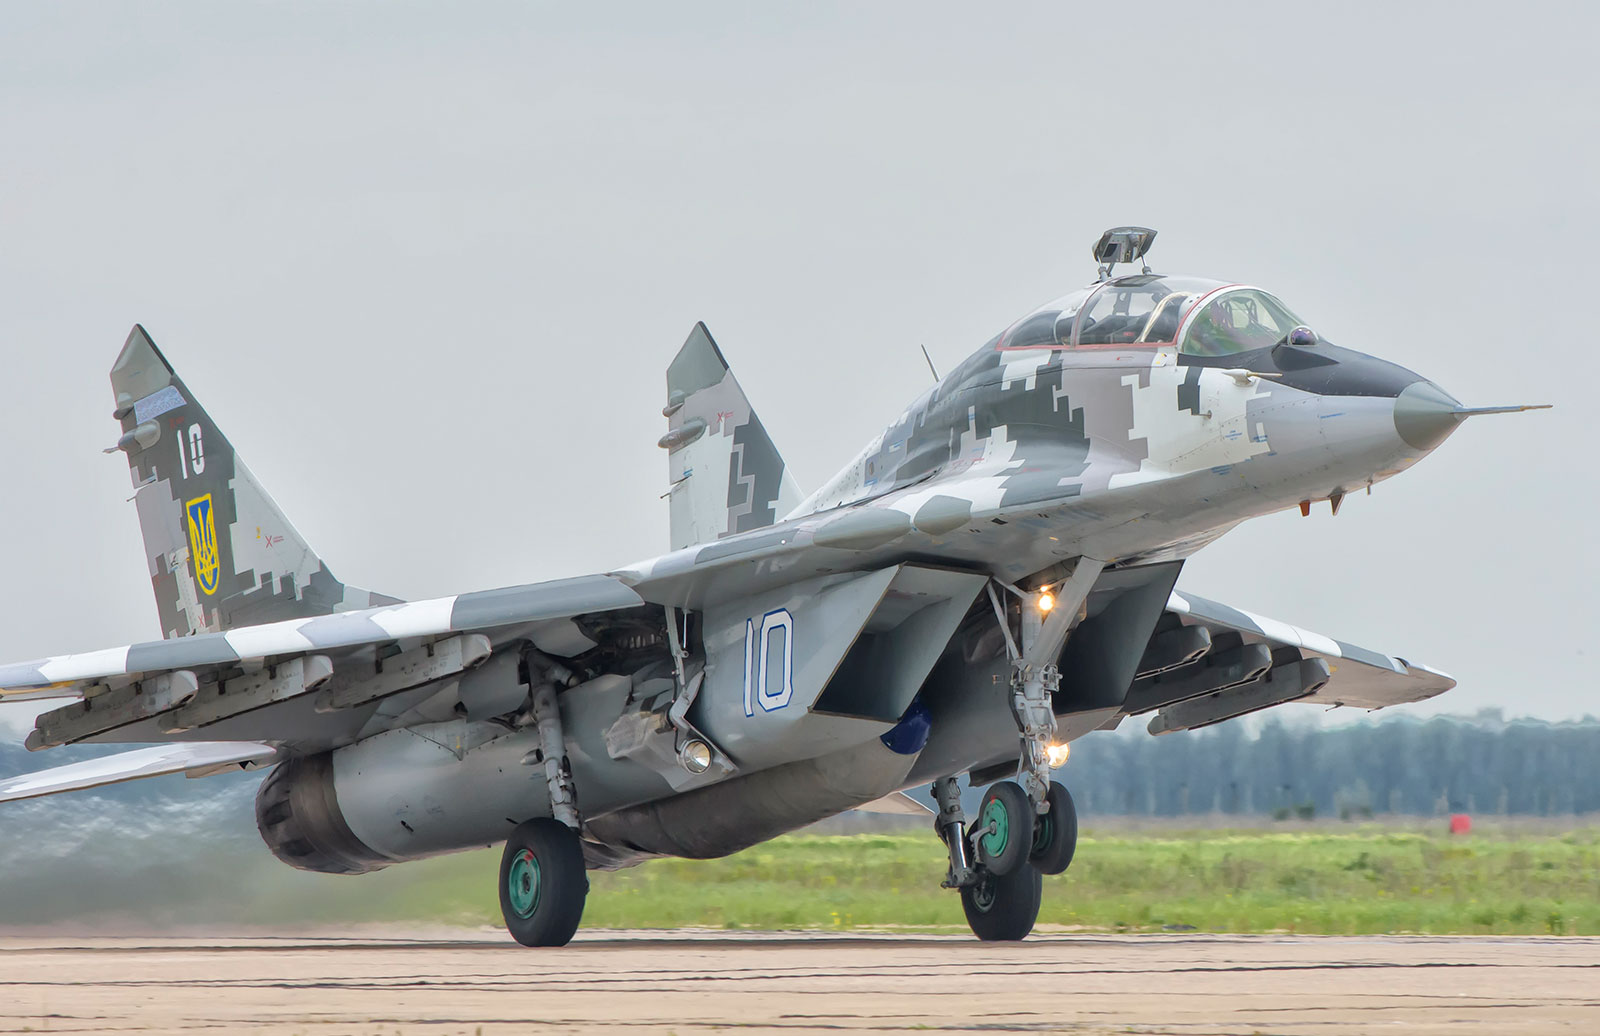 A Mig-29 of the Ukrainian Air Force took off from Mykolaiv Air Base for a training mission in Ukraine in 2016. Ukrainian President Volodymyr Zelensky has repeatedly asked other countries to equip Mig fighters. -29 Fulcrum from the Soviet era, which Ukrainian pilots knew how to fly.  . 